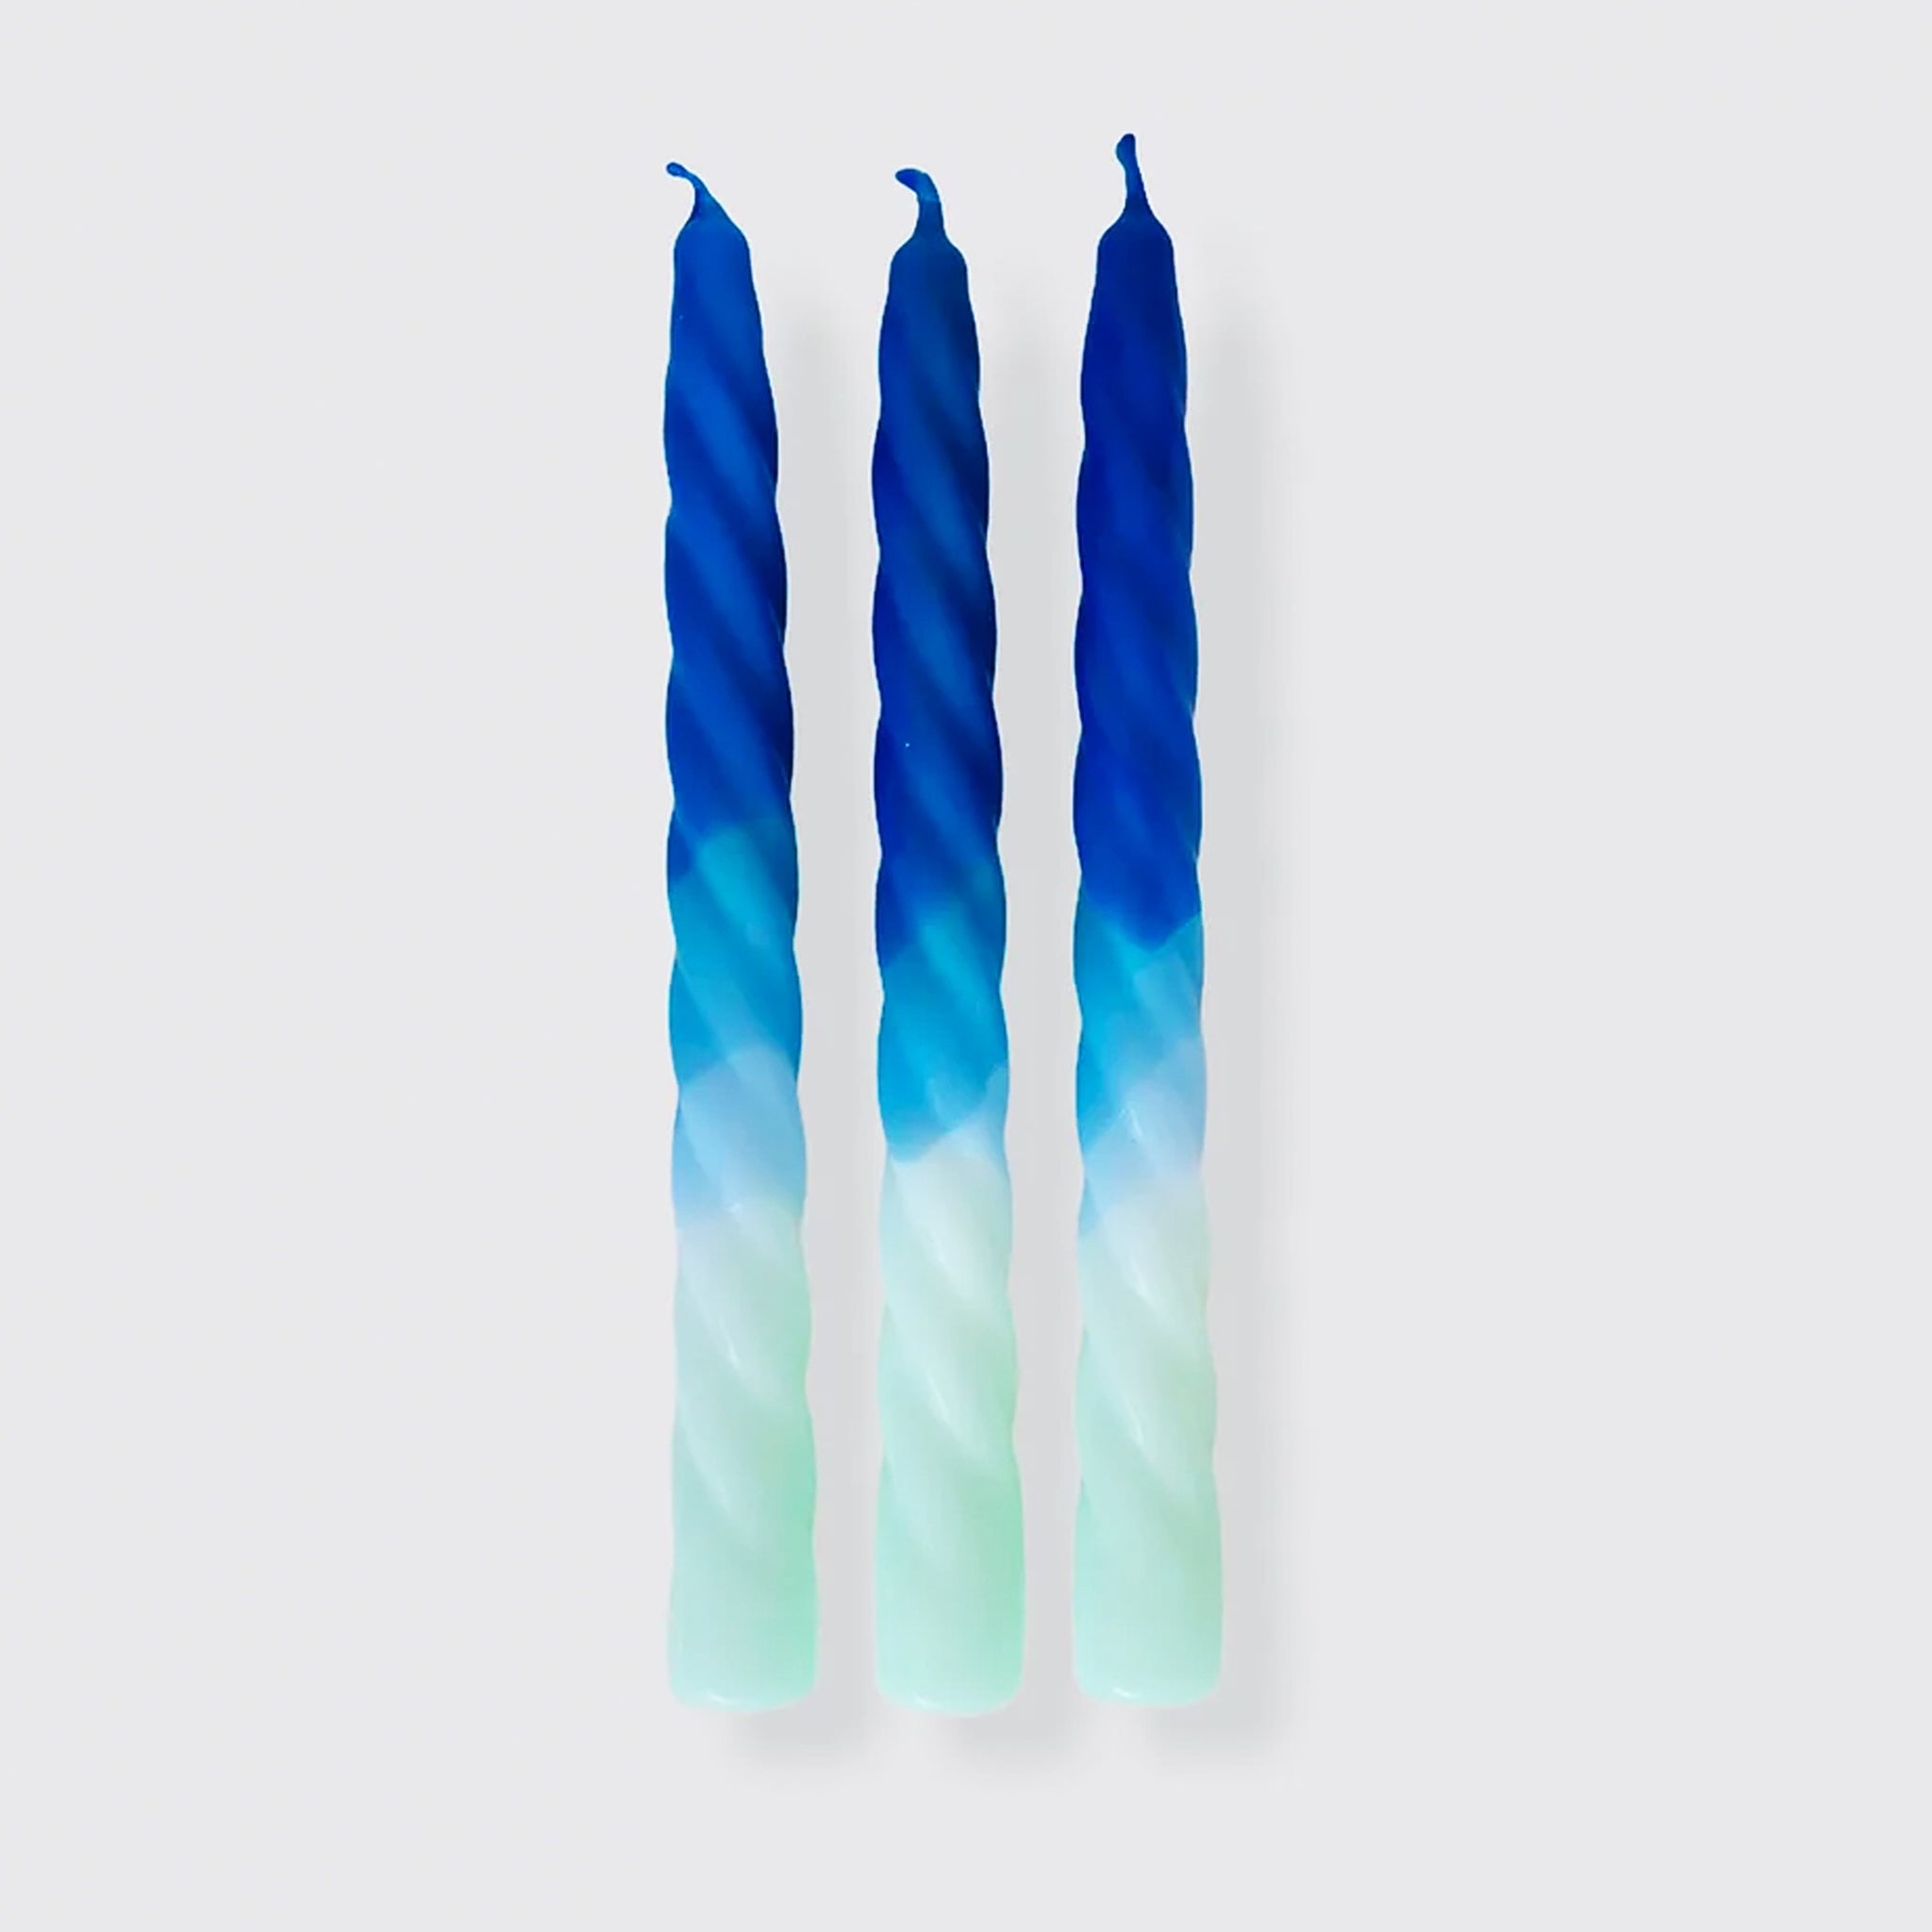 Set Of 3 Dip Dye Twisted Blueberry Candles